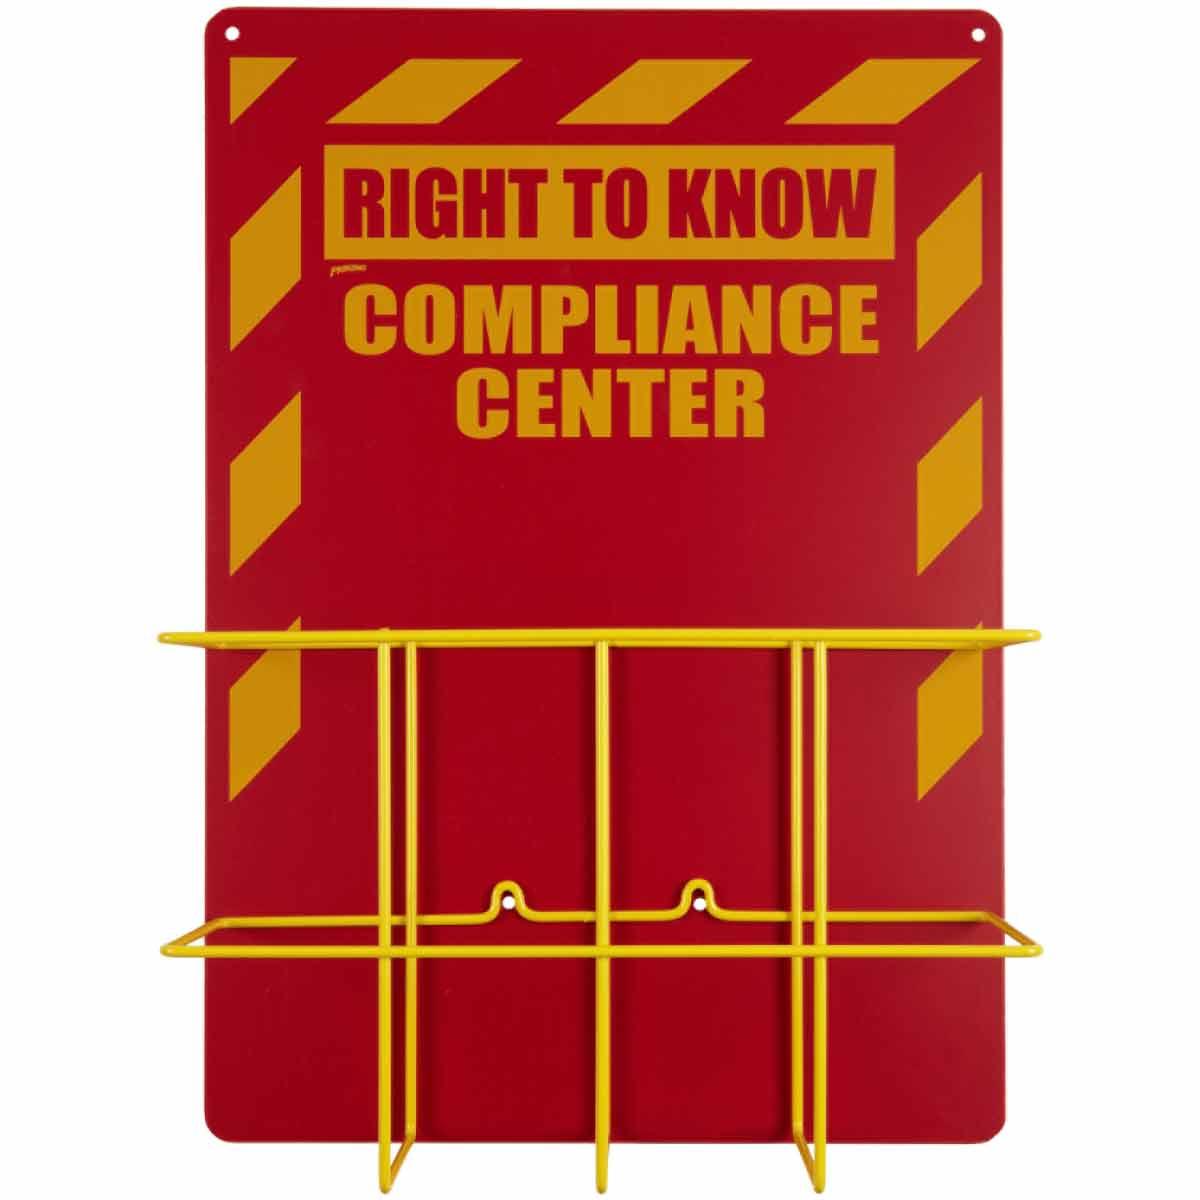 Brady® Prinzing® 2010DB Double Right-To-Know Center, RIGHT TO KNOW INFORMATION COMPLIANCE CENTER Legend, English, Yellow on Red, 20 in H x 29 in W, Polystyrene, Wall Mount